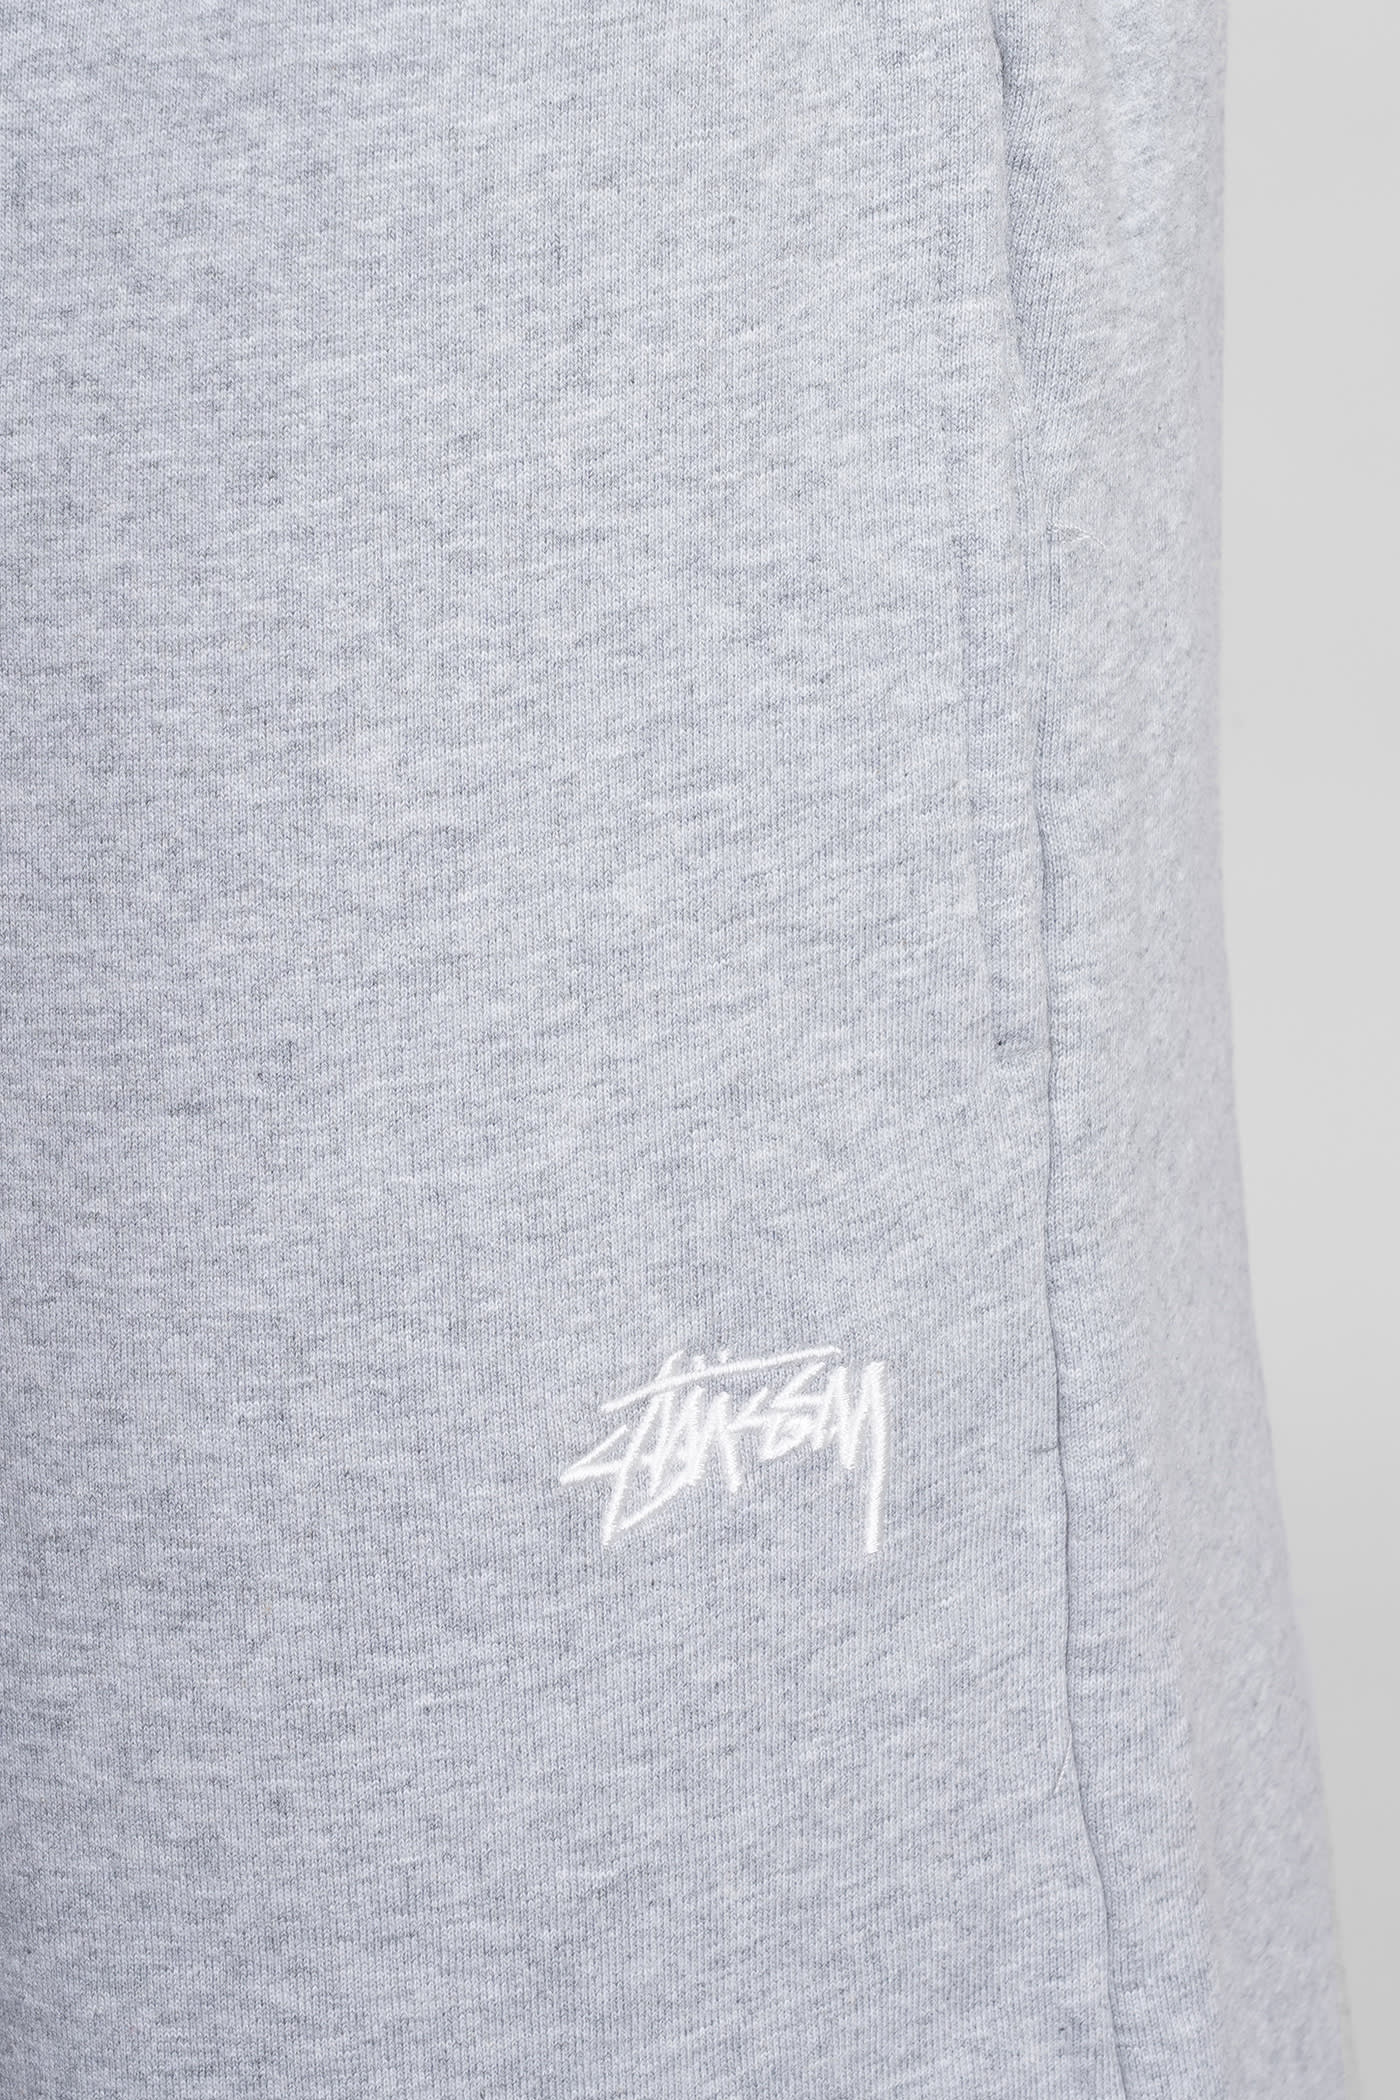 STUSSY PANTS IN GREY COTTON 